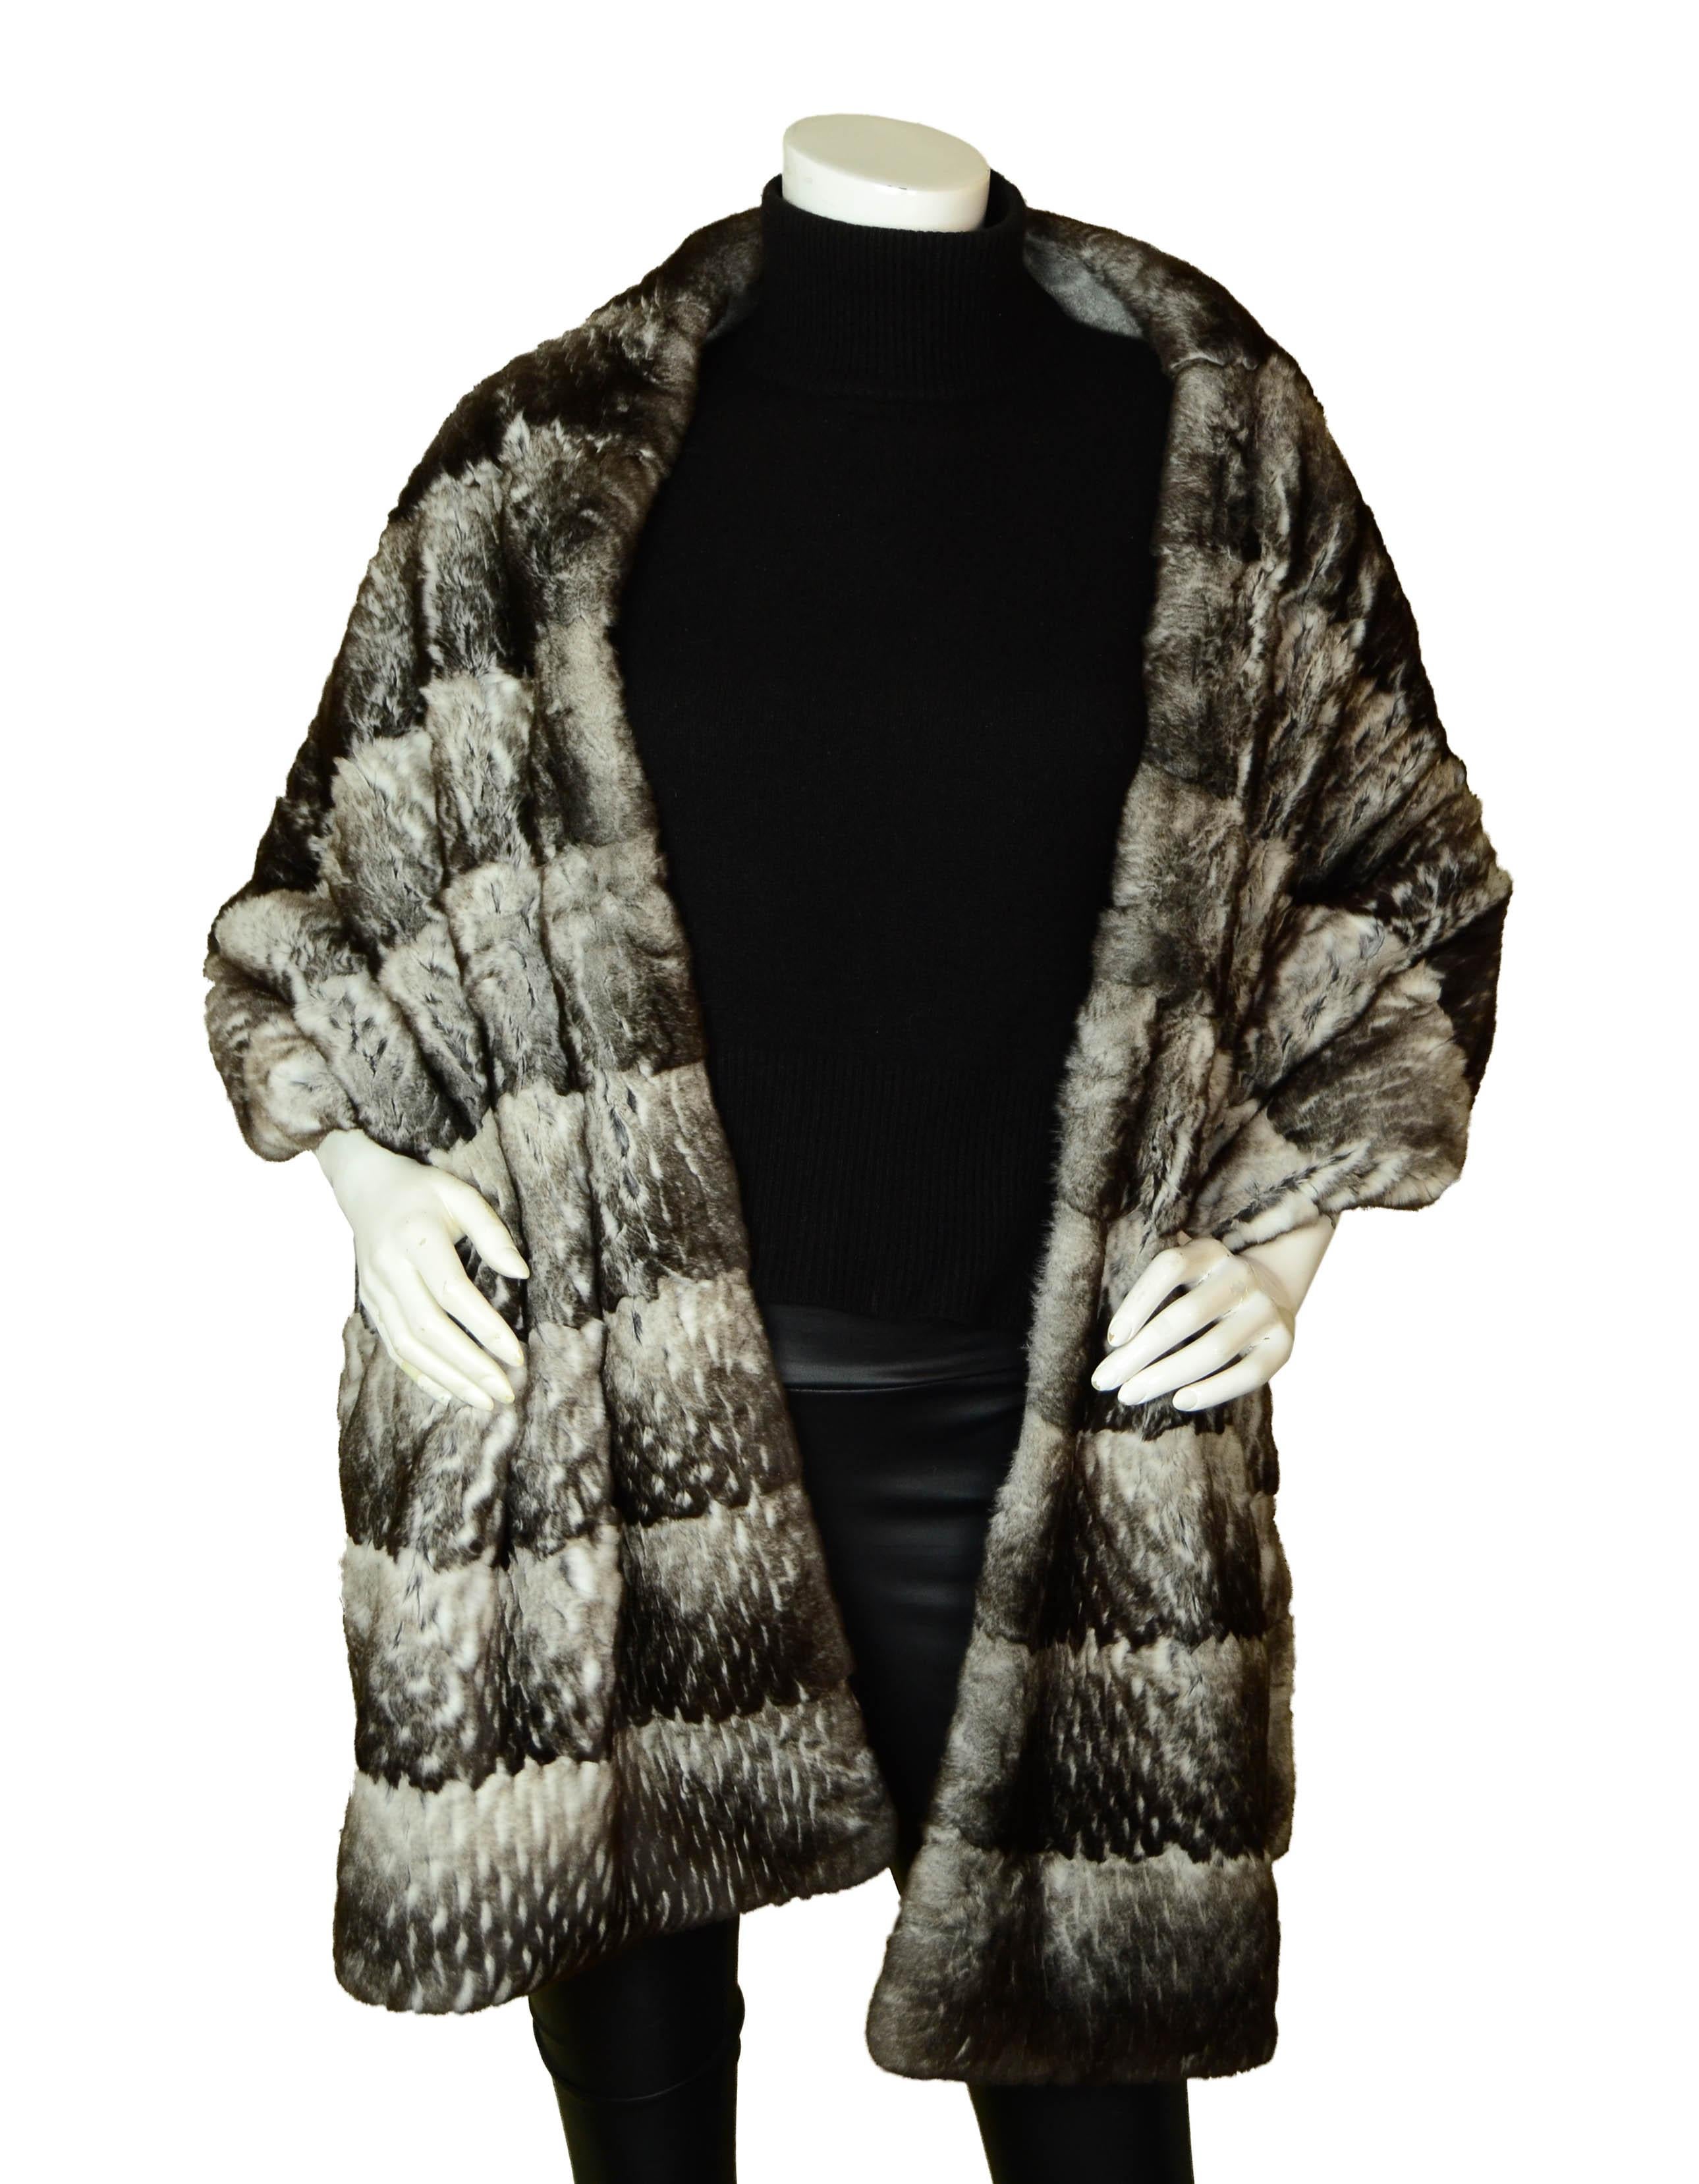 Chanel Orylag Rabbit Fur & Cashmere Stole/Throw

Made In: Italy
Color: Grey & black
Materials: Rabbit fur & cashmere
Overall Condition: Excellent

Measurements:
18.5”W x 78.5”H